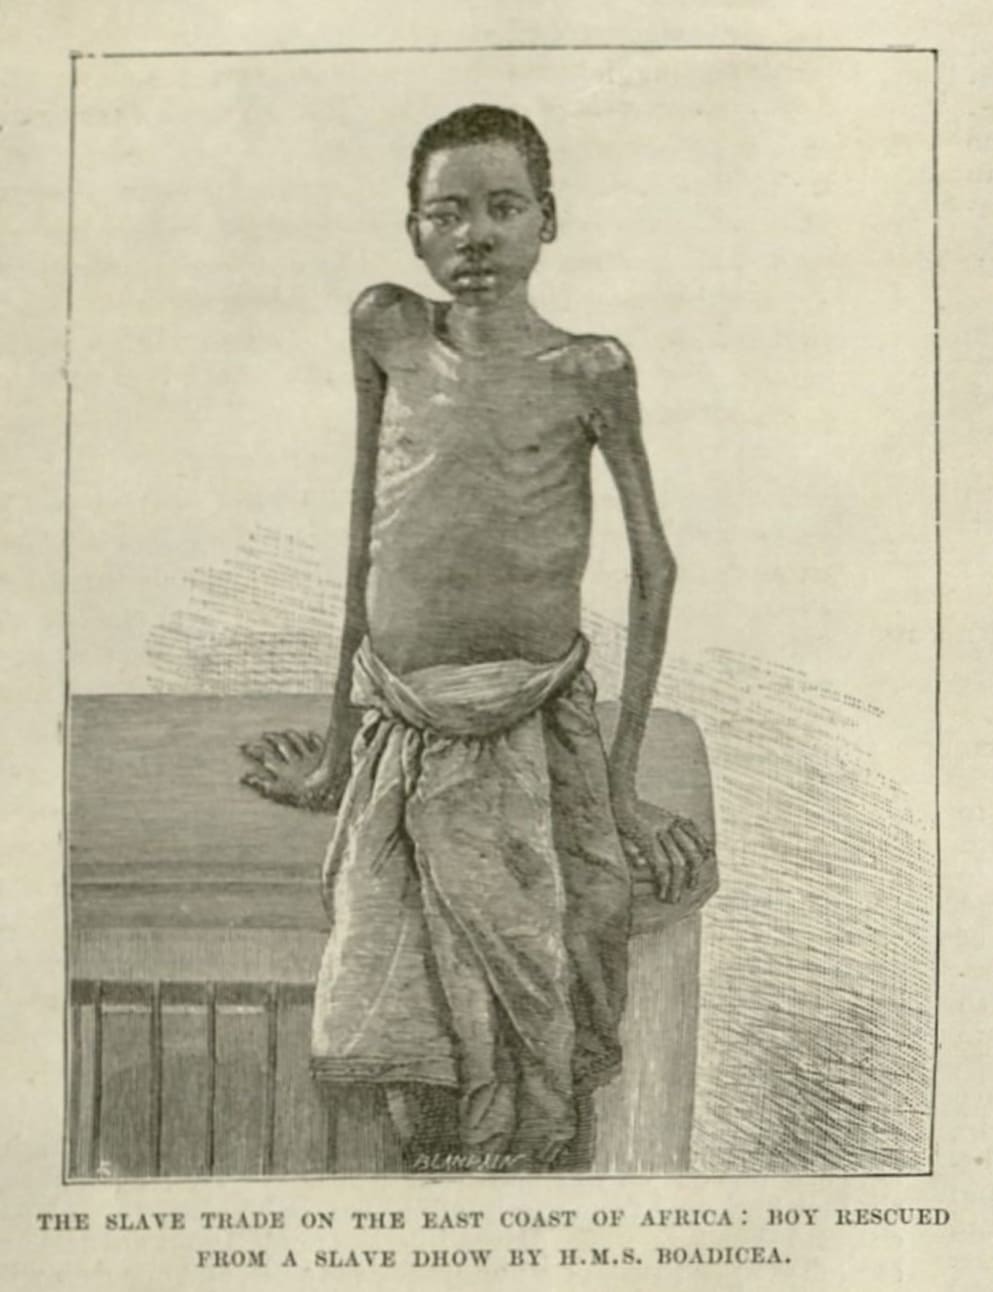 Boy Rescued from a Slave Dhow